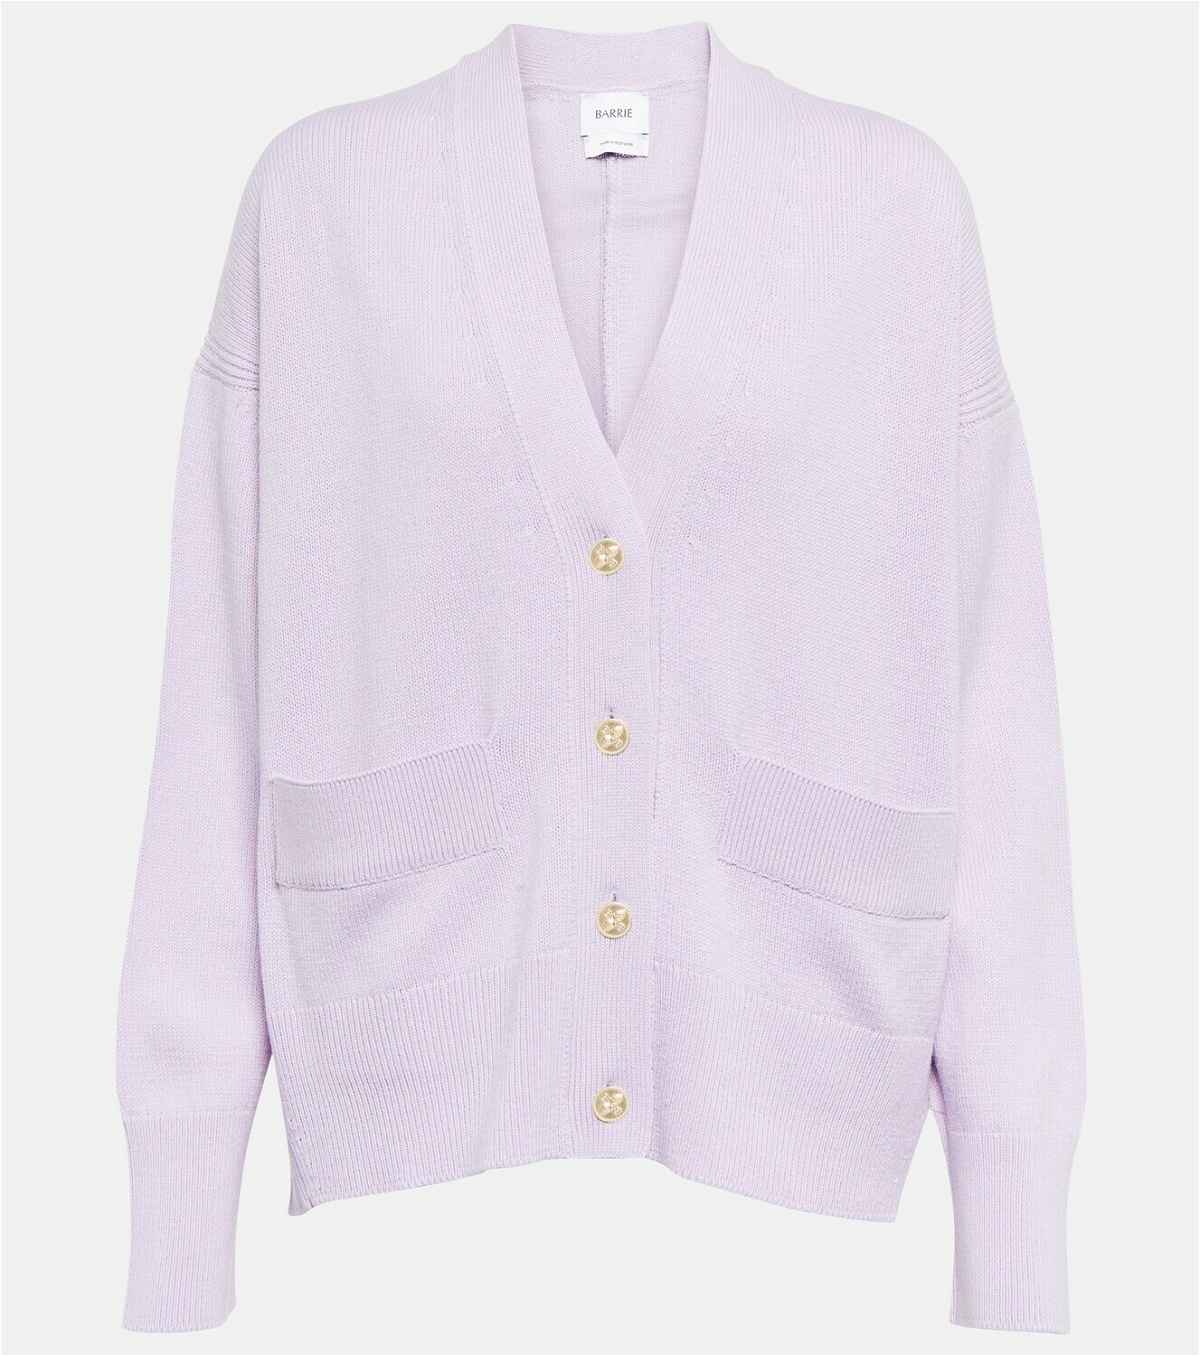 Barrie Cashmere cardigan